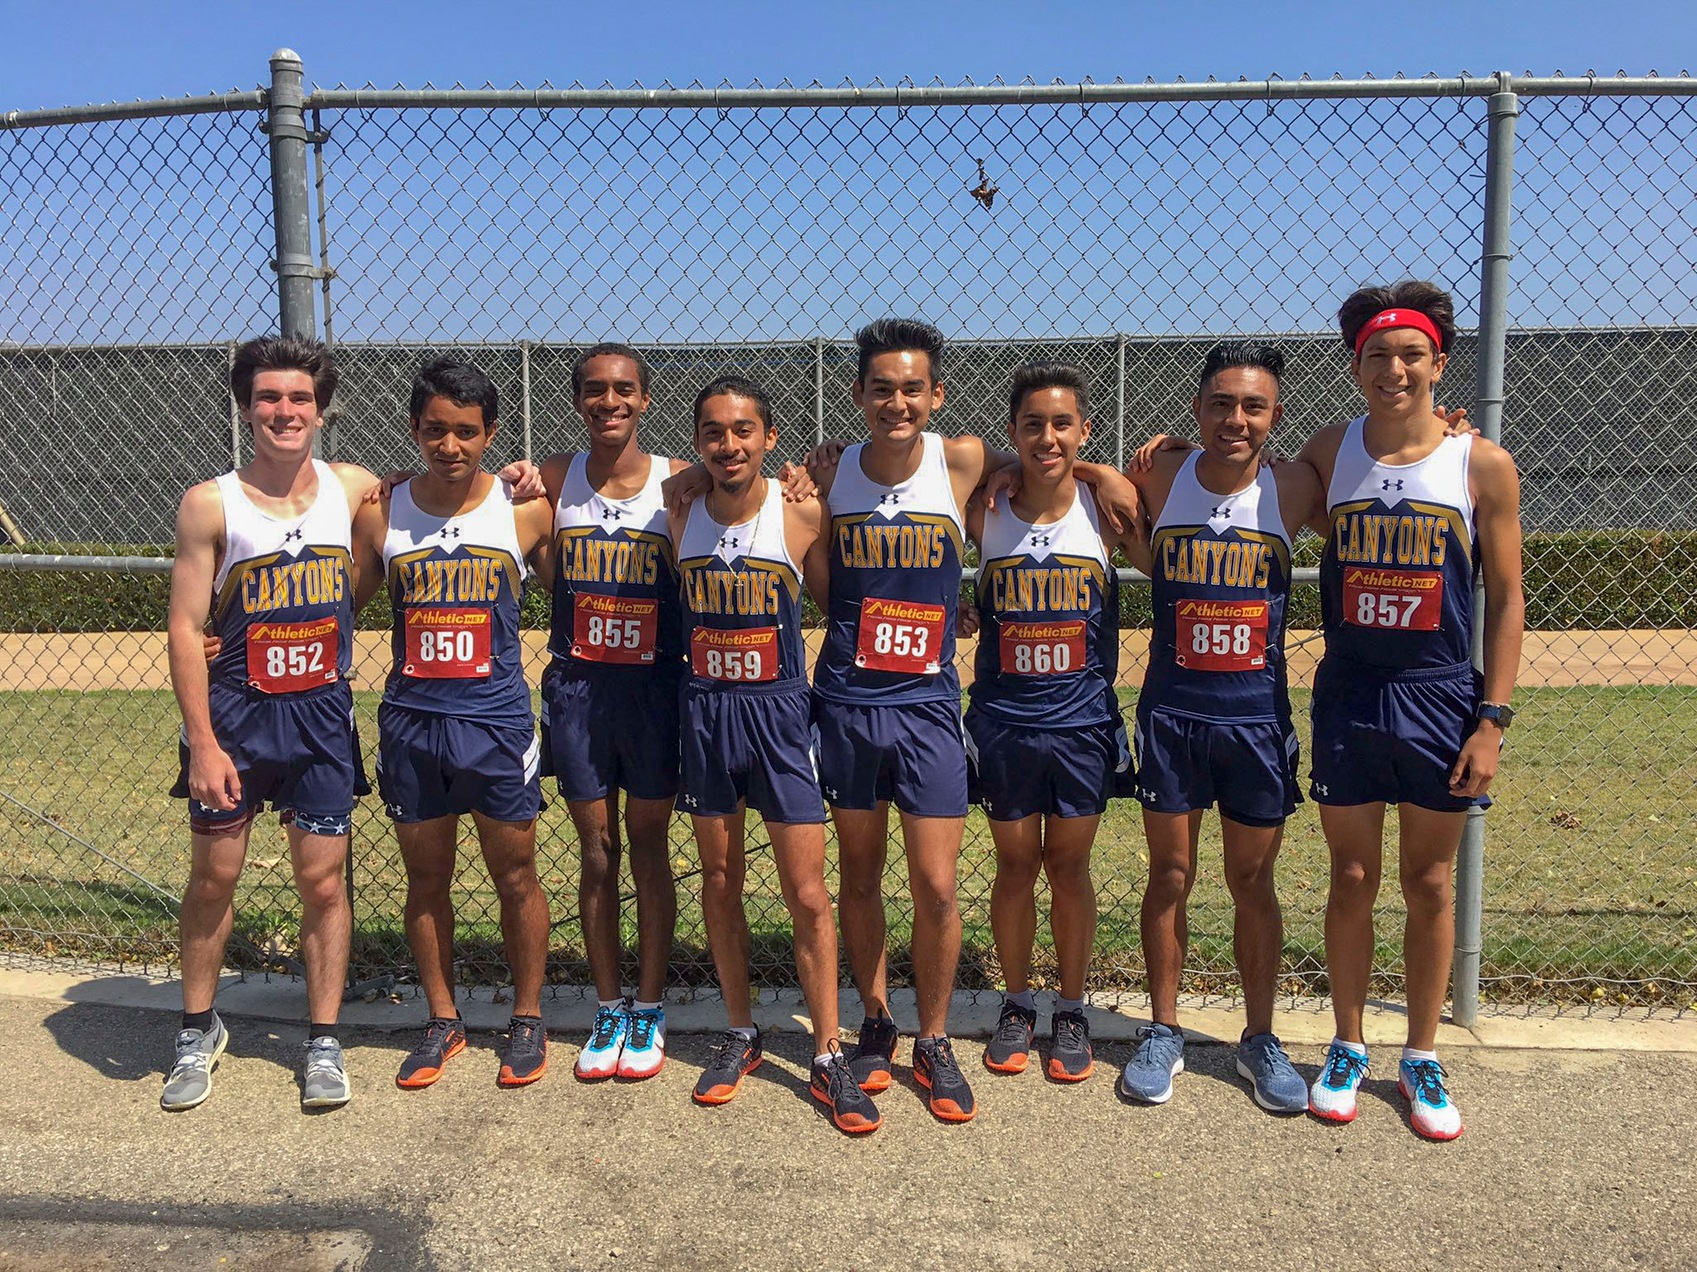 College of the Canyons men's cross country team at Oxnard Invitational on Aug. 23, 2019.